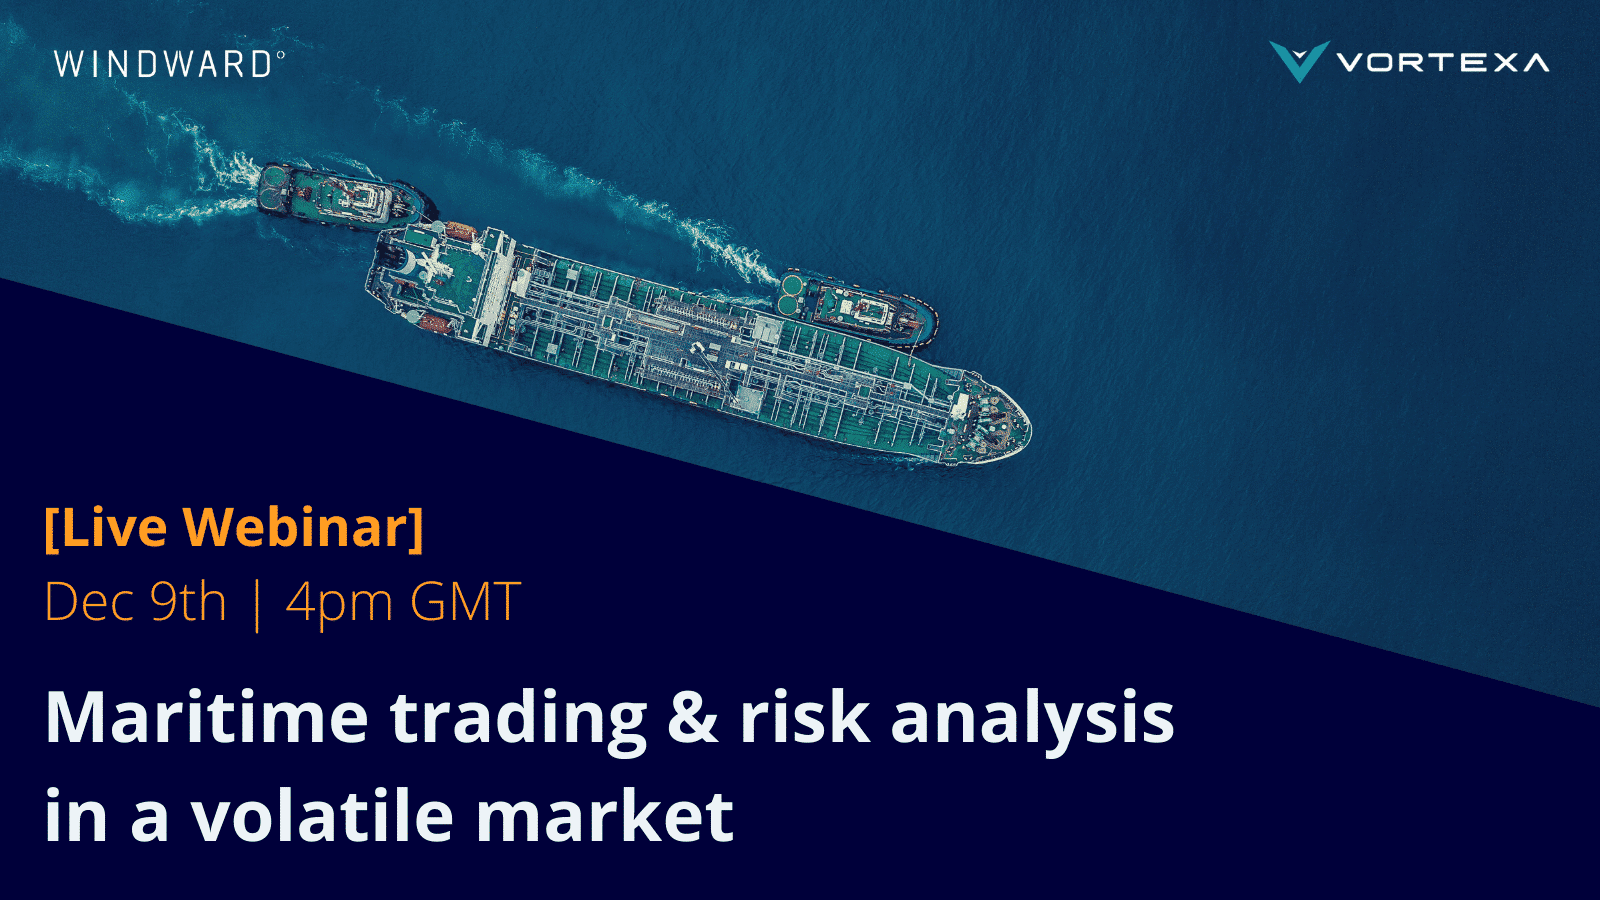 [On Demand Webinar] Maritime Trading & Risk Analysis in a Volatile Market